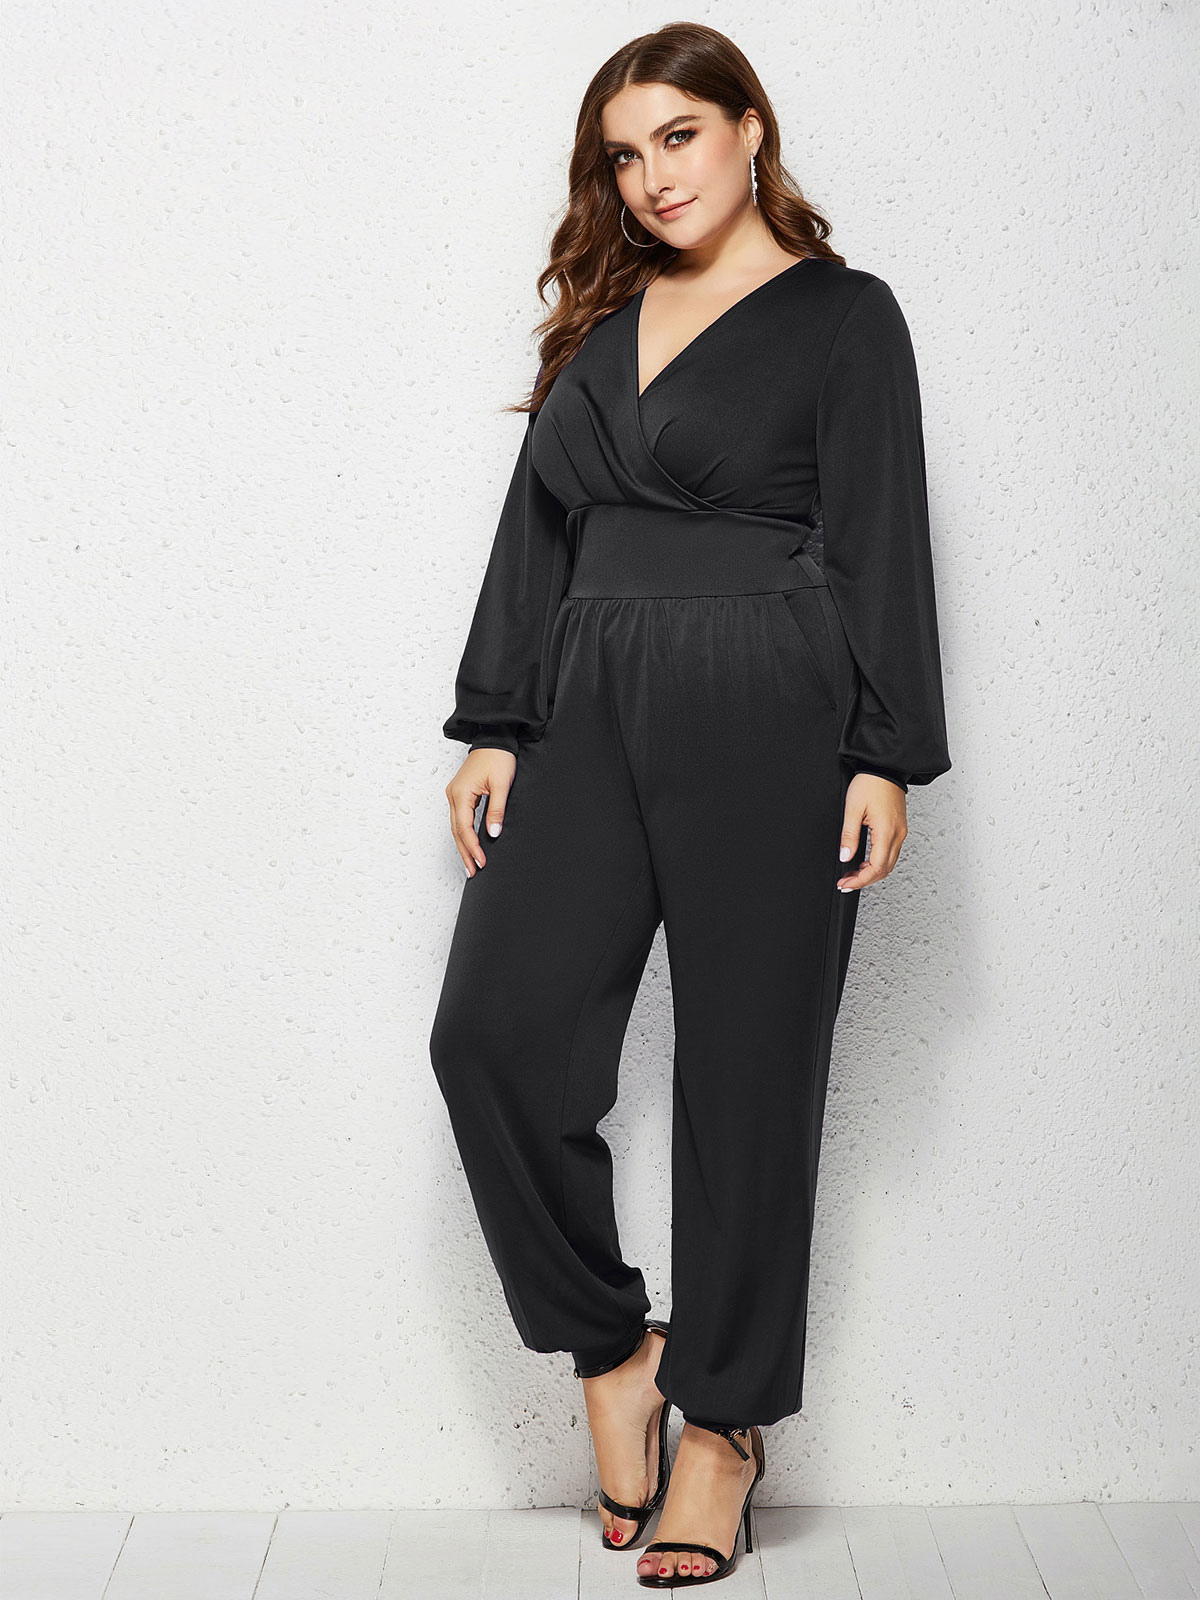 Plus Size Jumpsuit For Women Burgundy V-Neck Long Sleeves Pleated ...